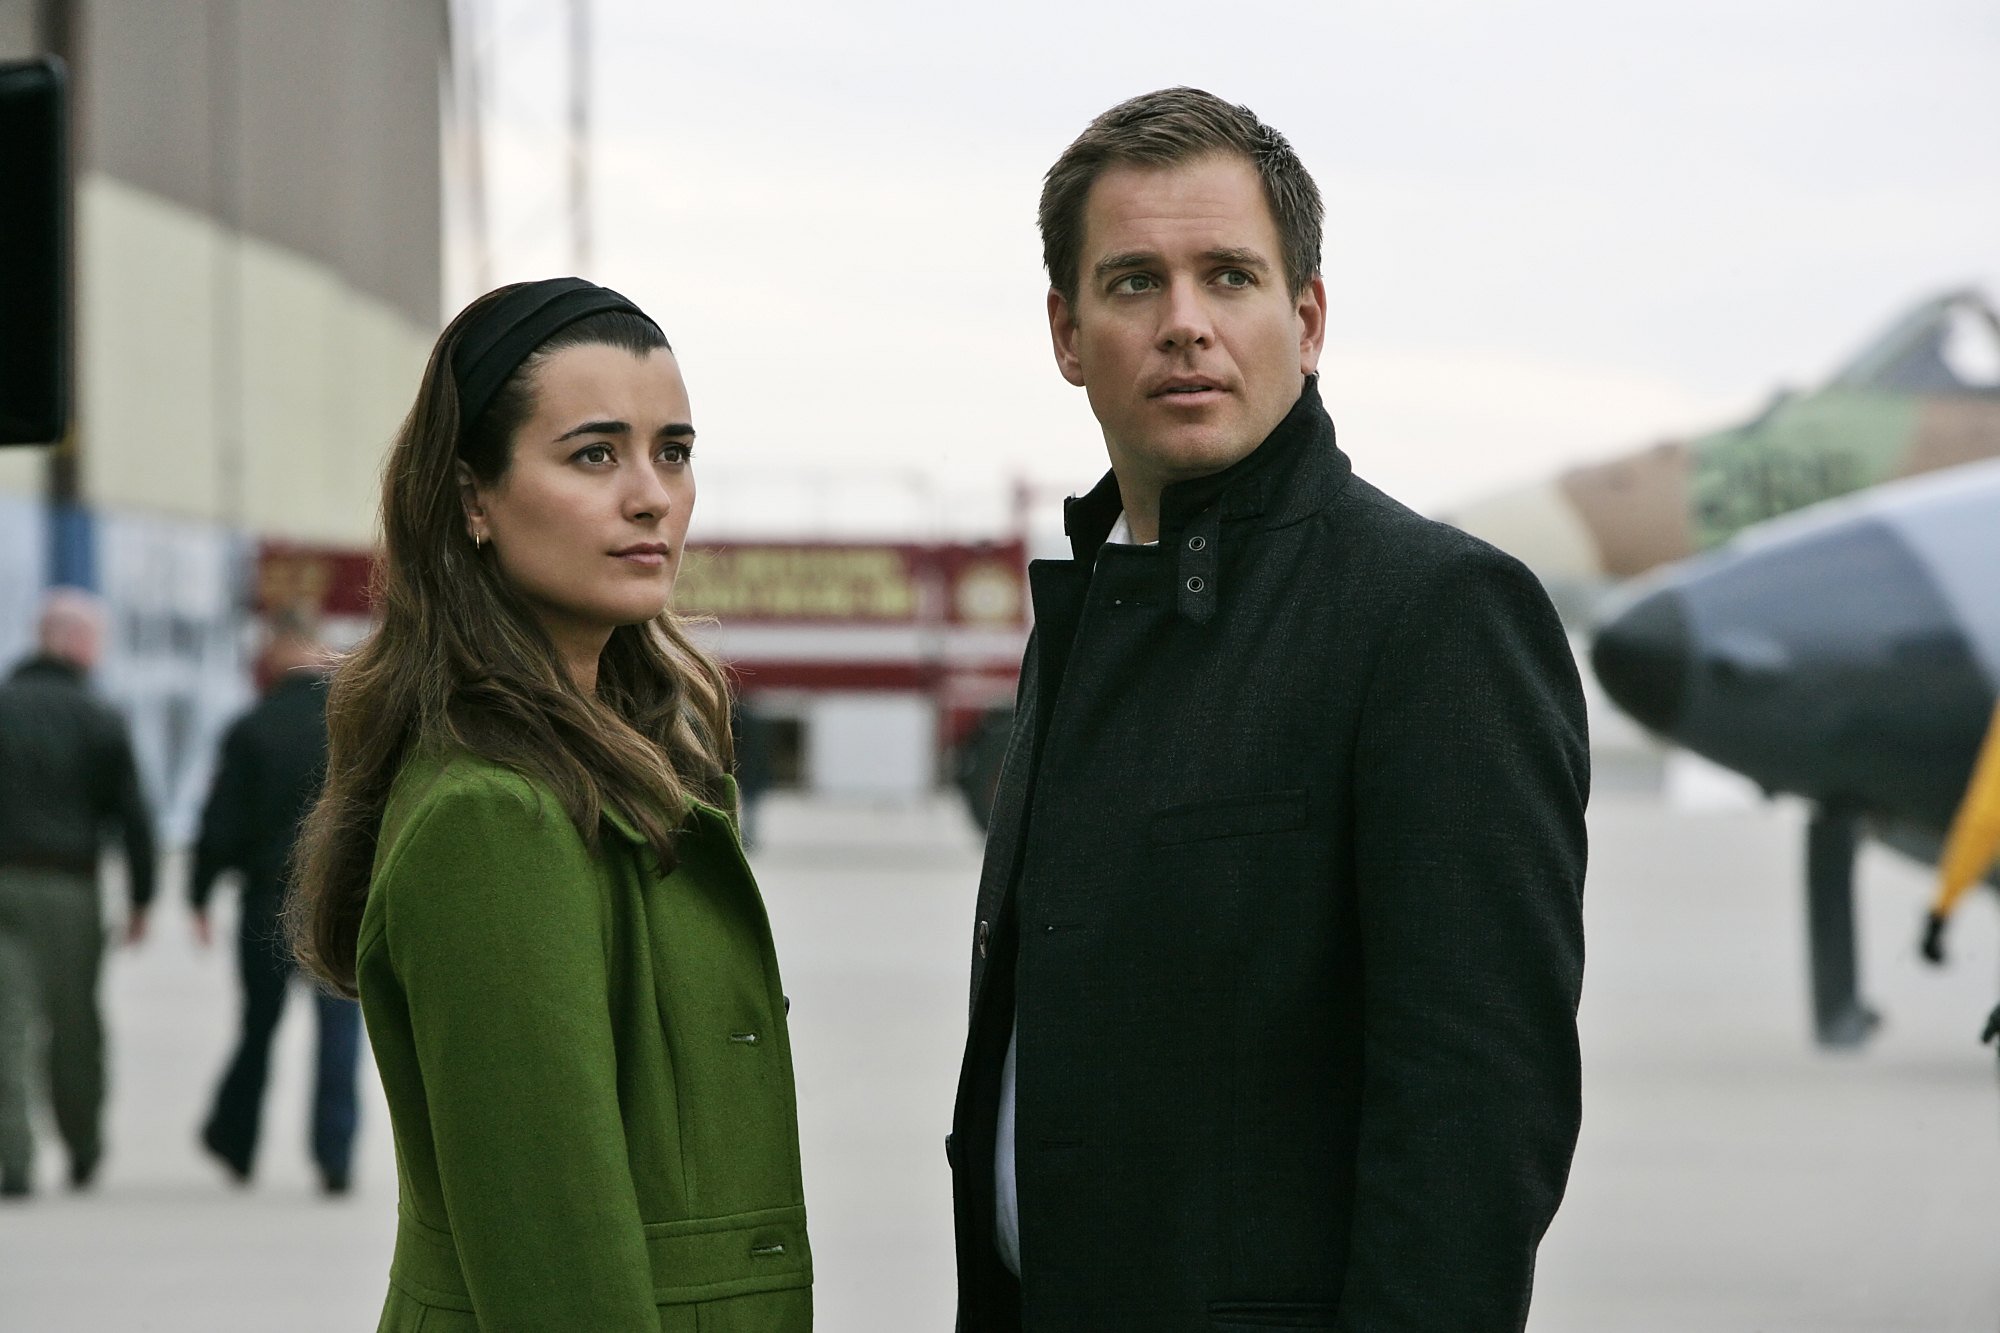 'NCIS' stars Cote de Pablo and Michael Weatherly on set in 2009